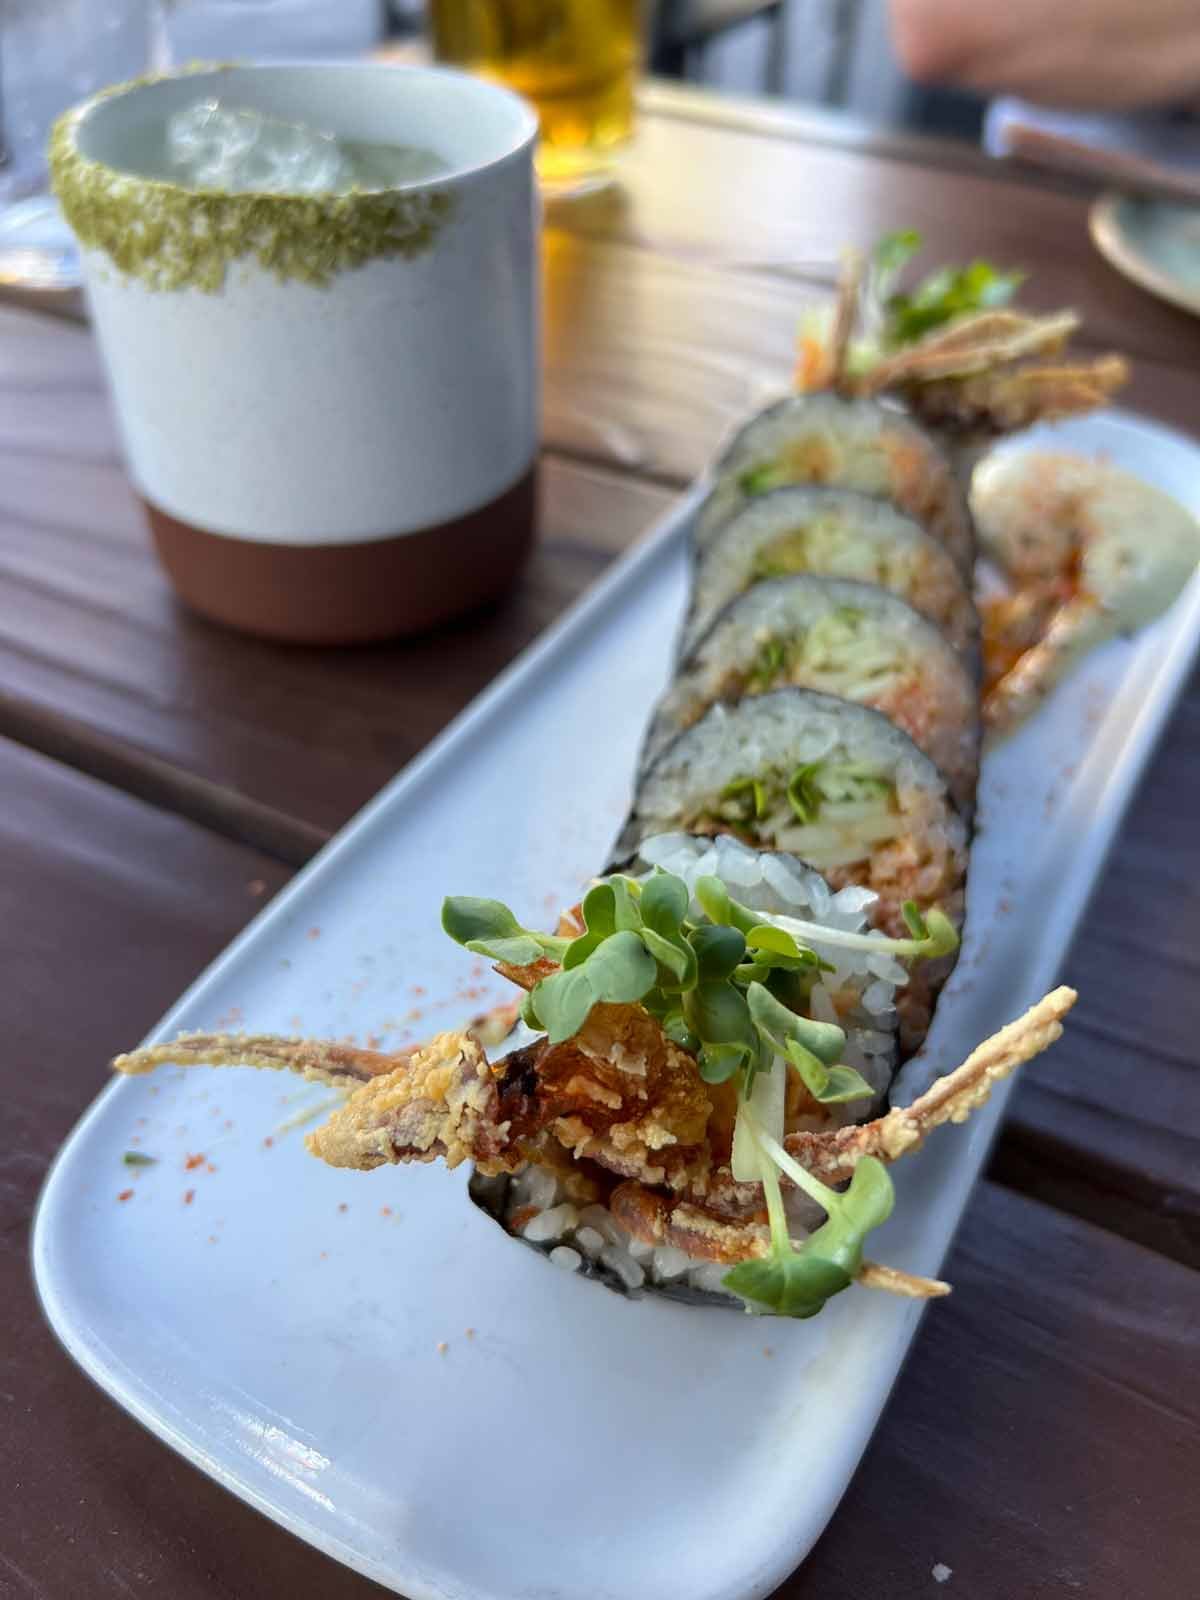 The Green Machine: Bamboo Sushi's No. 1 Roll Comes to Denver